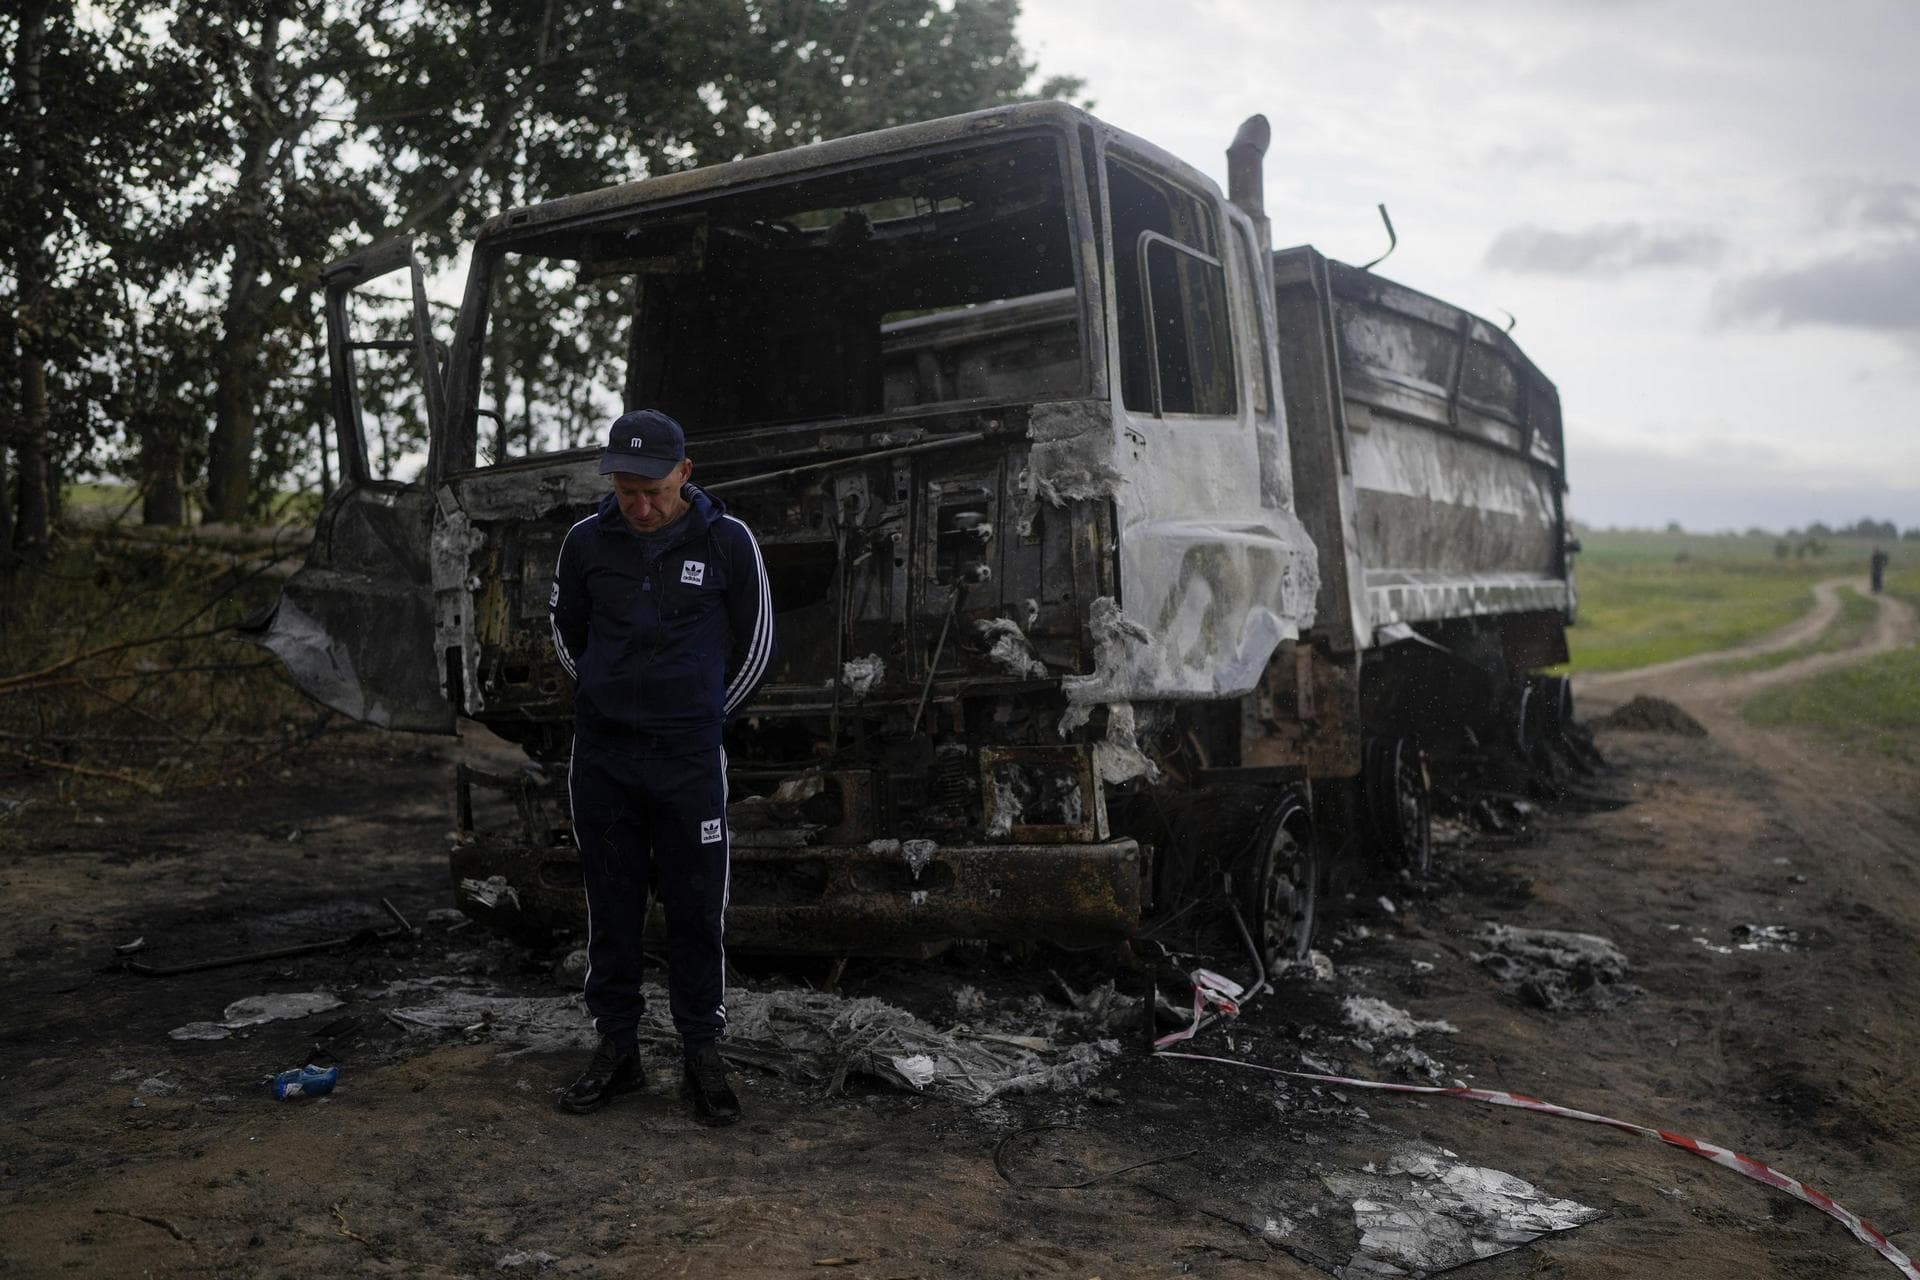 Vadym Schvydchenko stands next to his truck recentely damaged by a mine on a dirt track near Makariv, on the outskirts of Kyiv